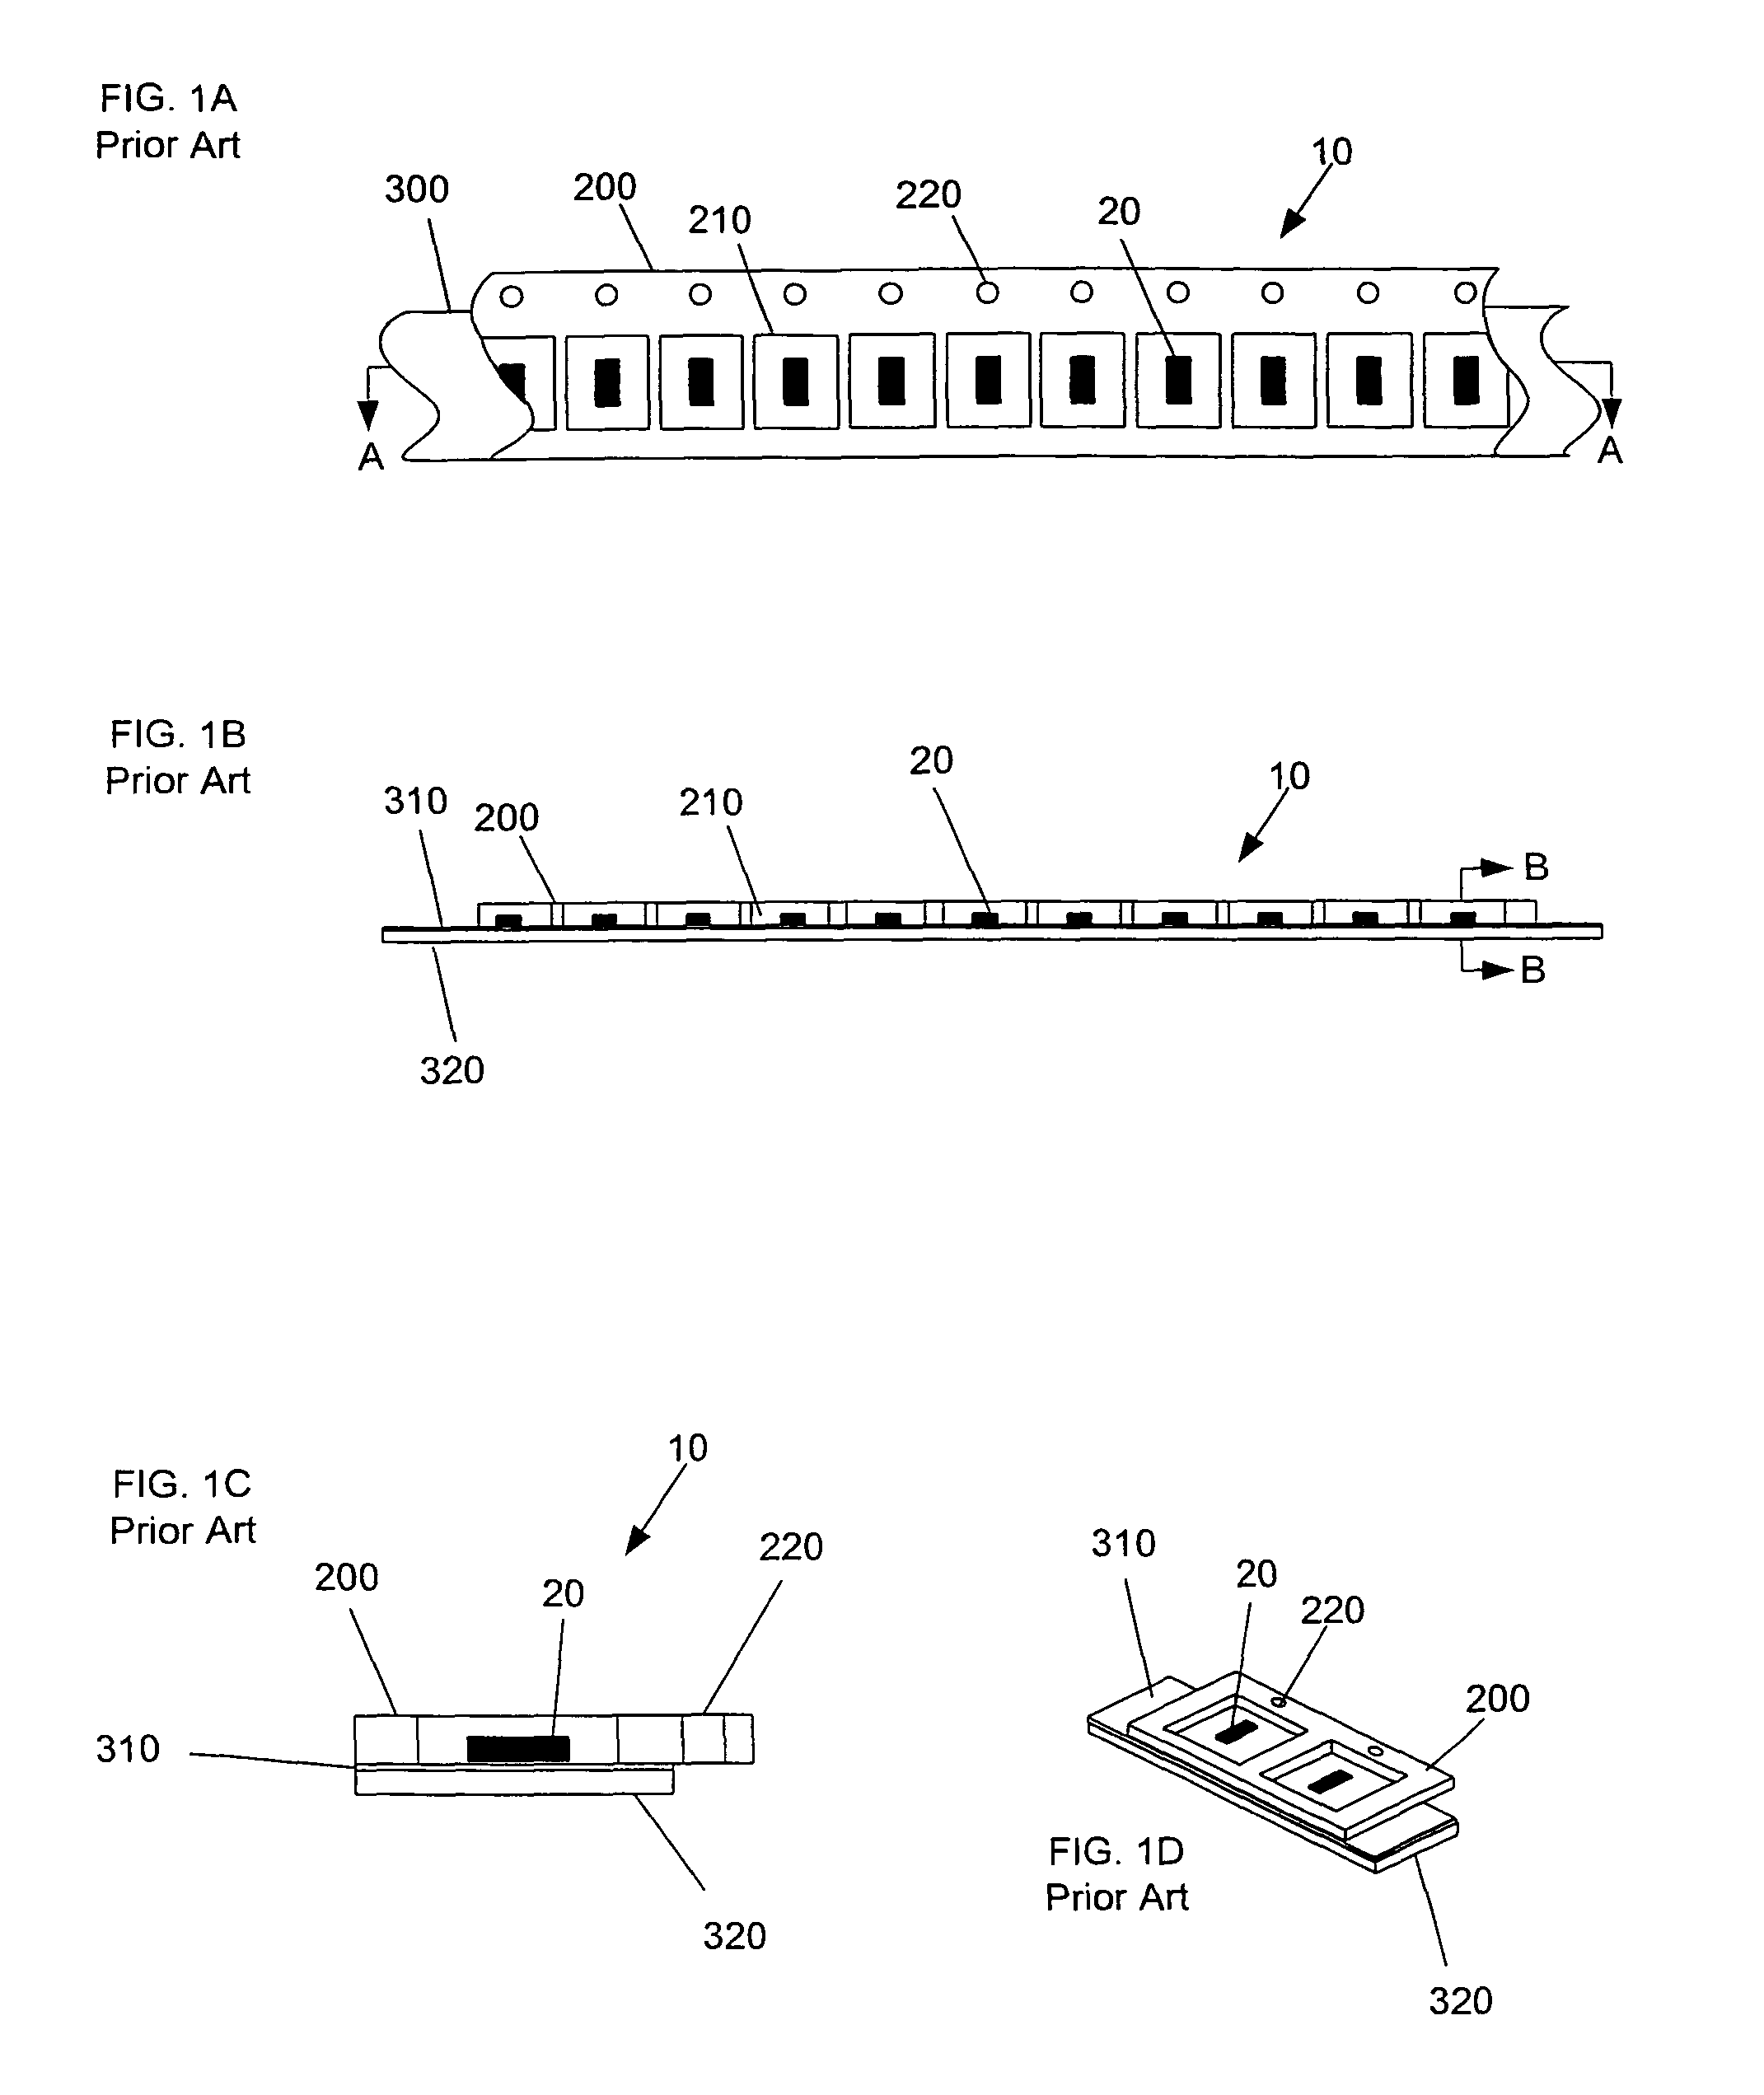 Method and apparatus to facilitate retention and removal of components placed on adhesive backed carrier tape for automated handling